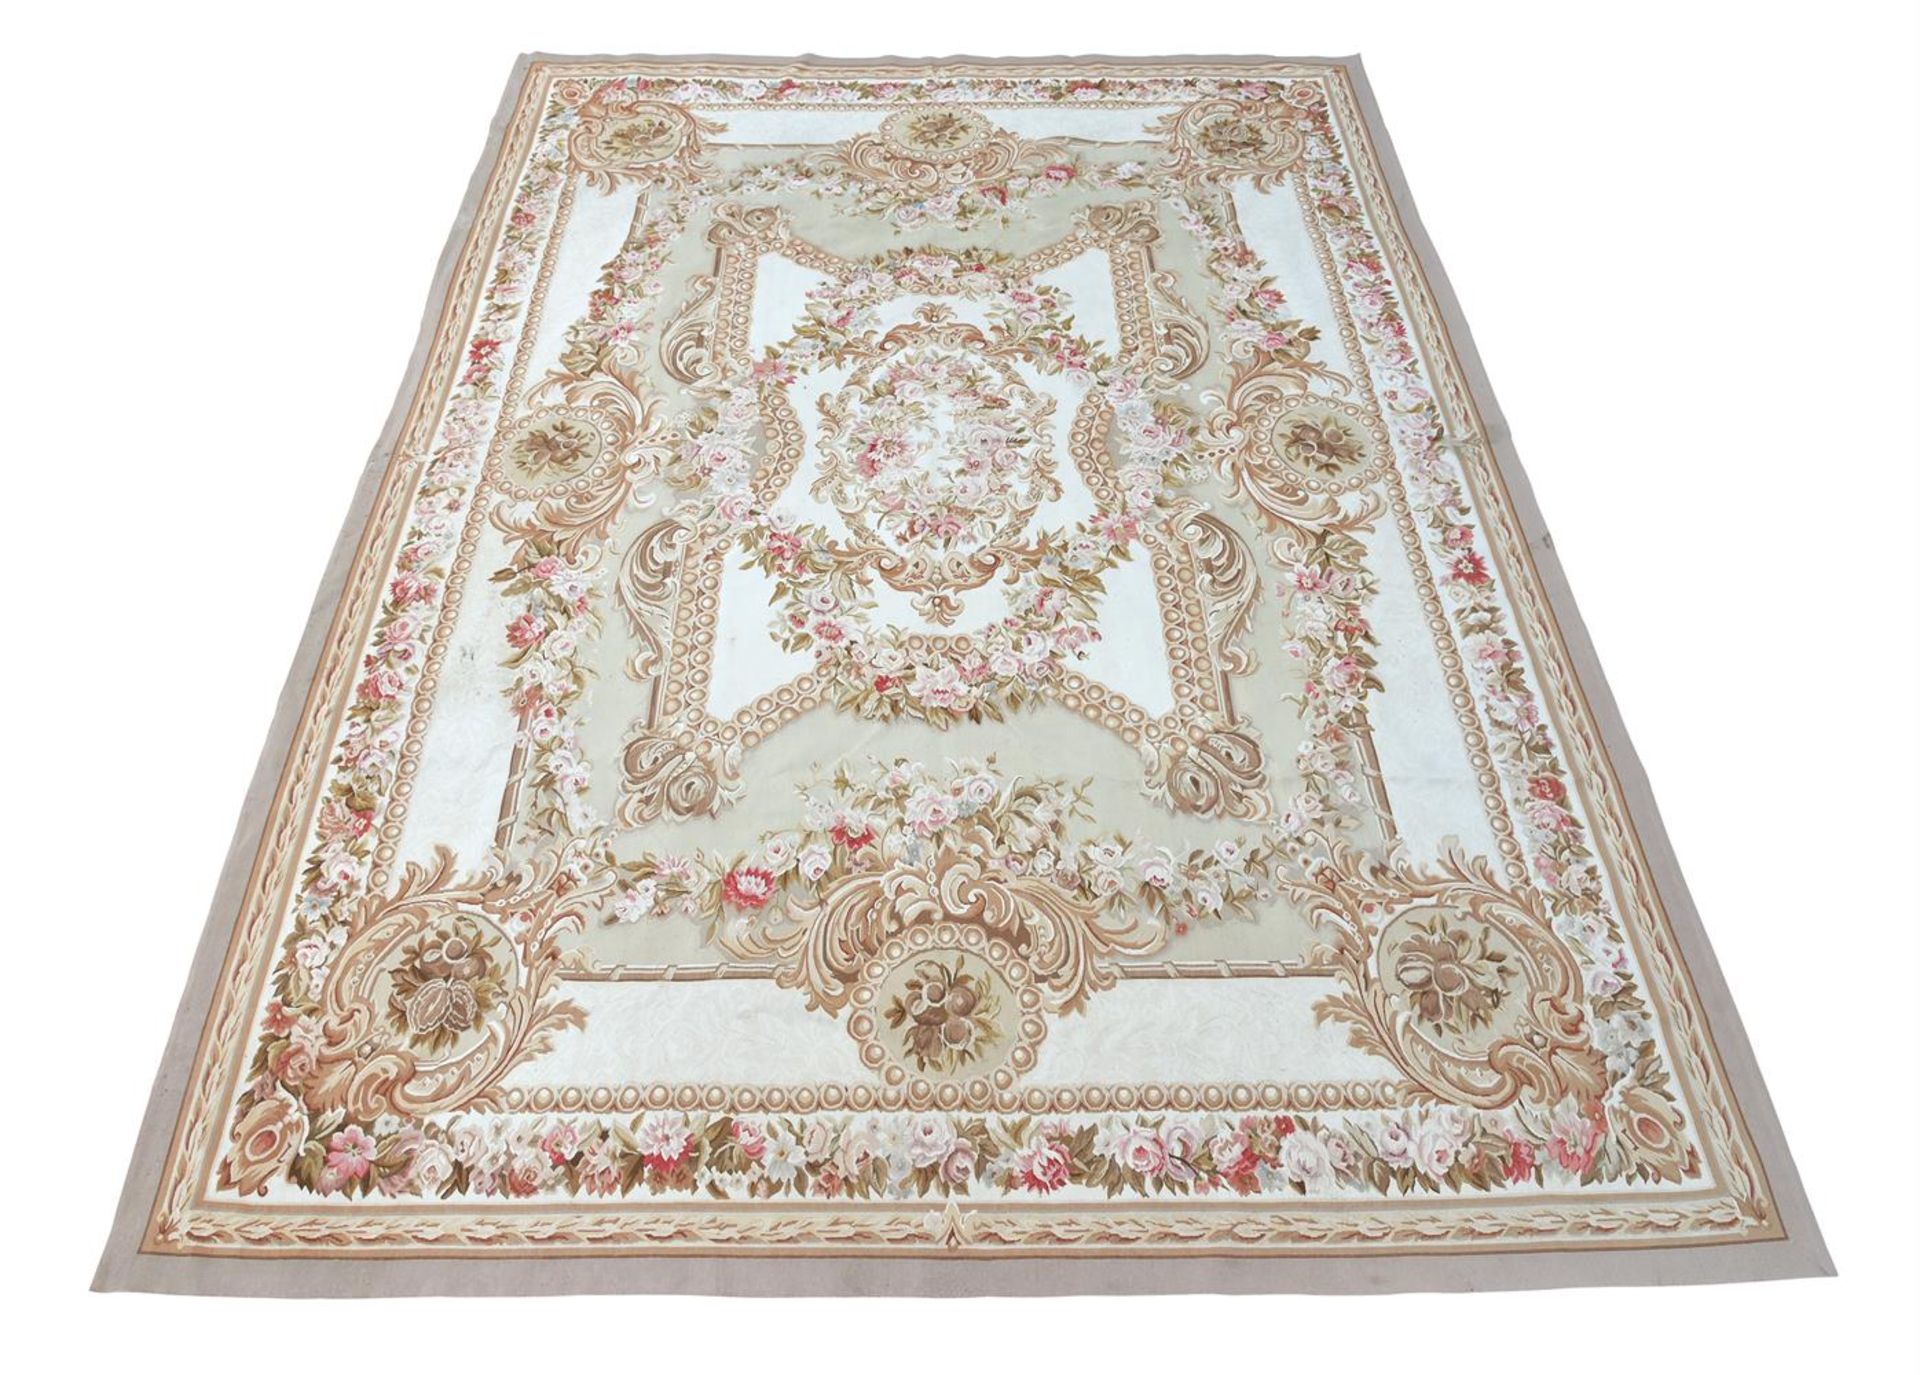 A FRENCH WOVEN CARPET IN AUBUSSON STYLE